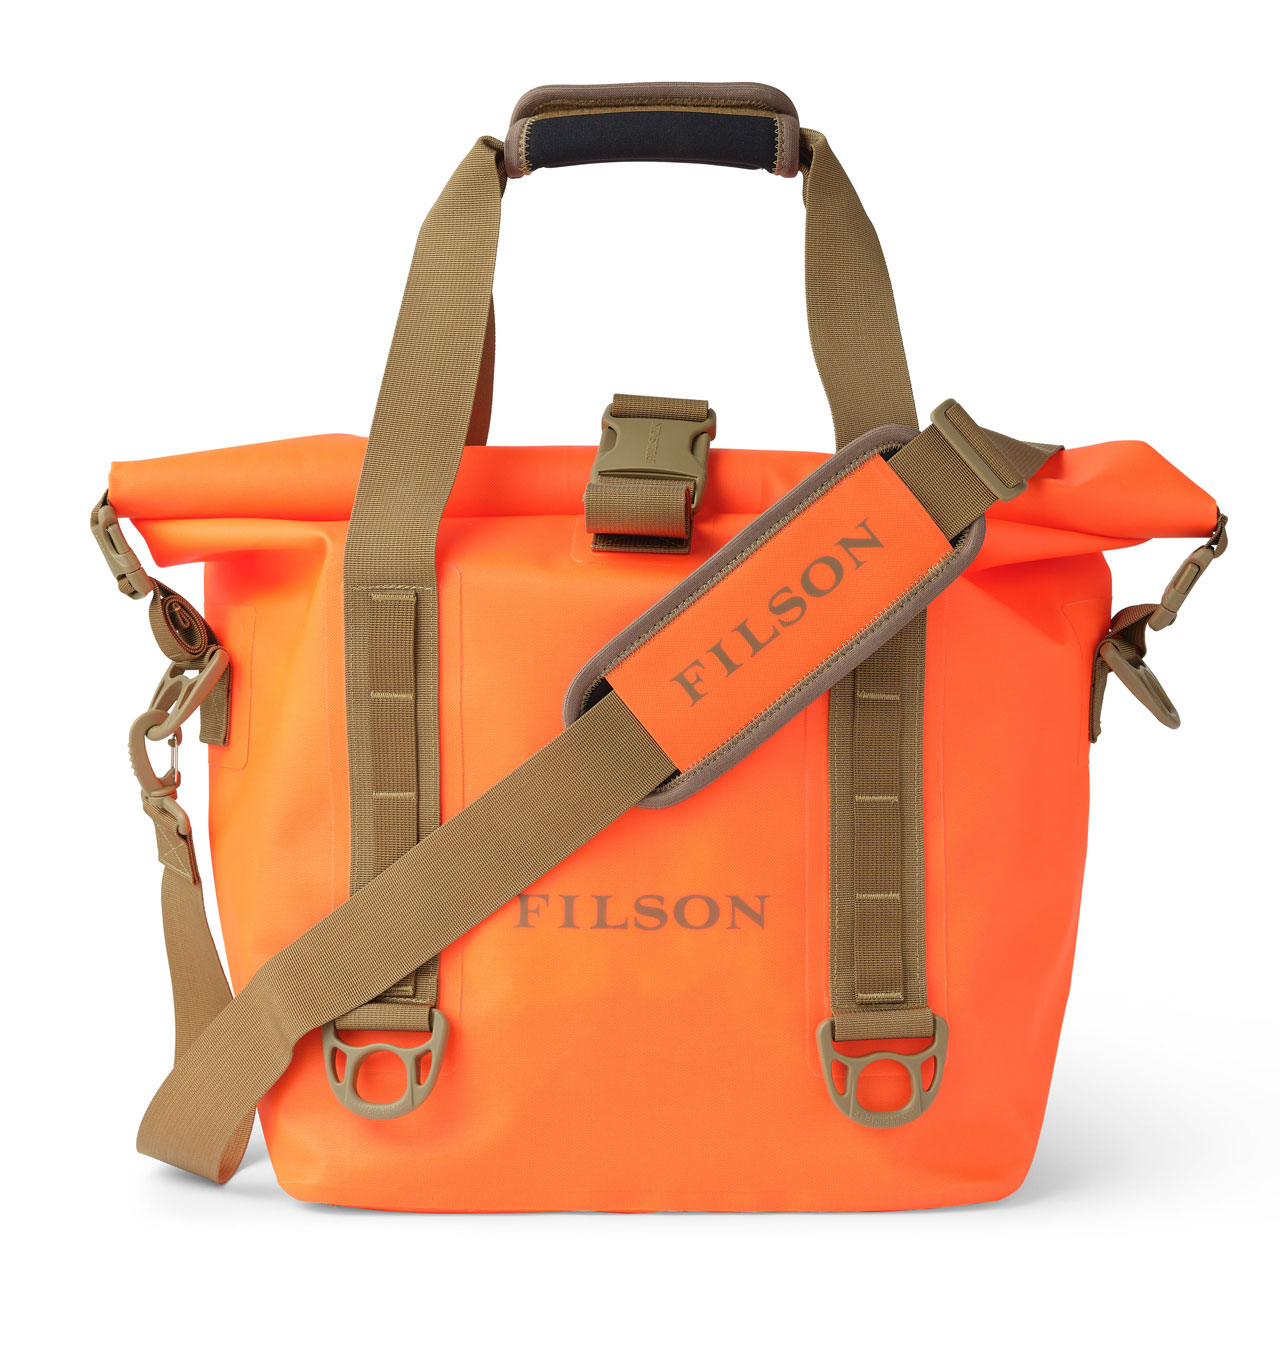 Filson---Dry-Roll-Top-Tote-Bag---Flame-1